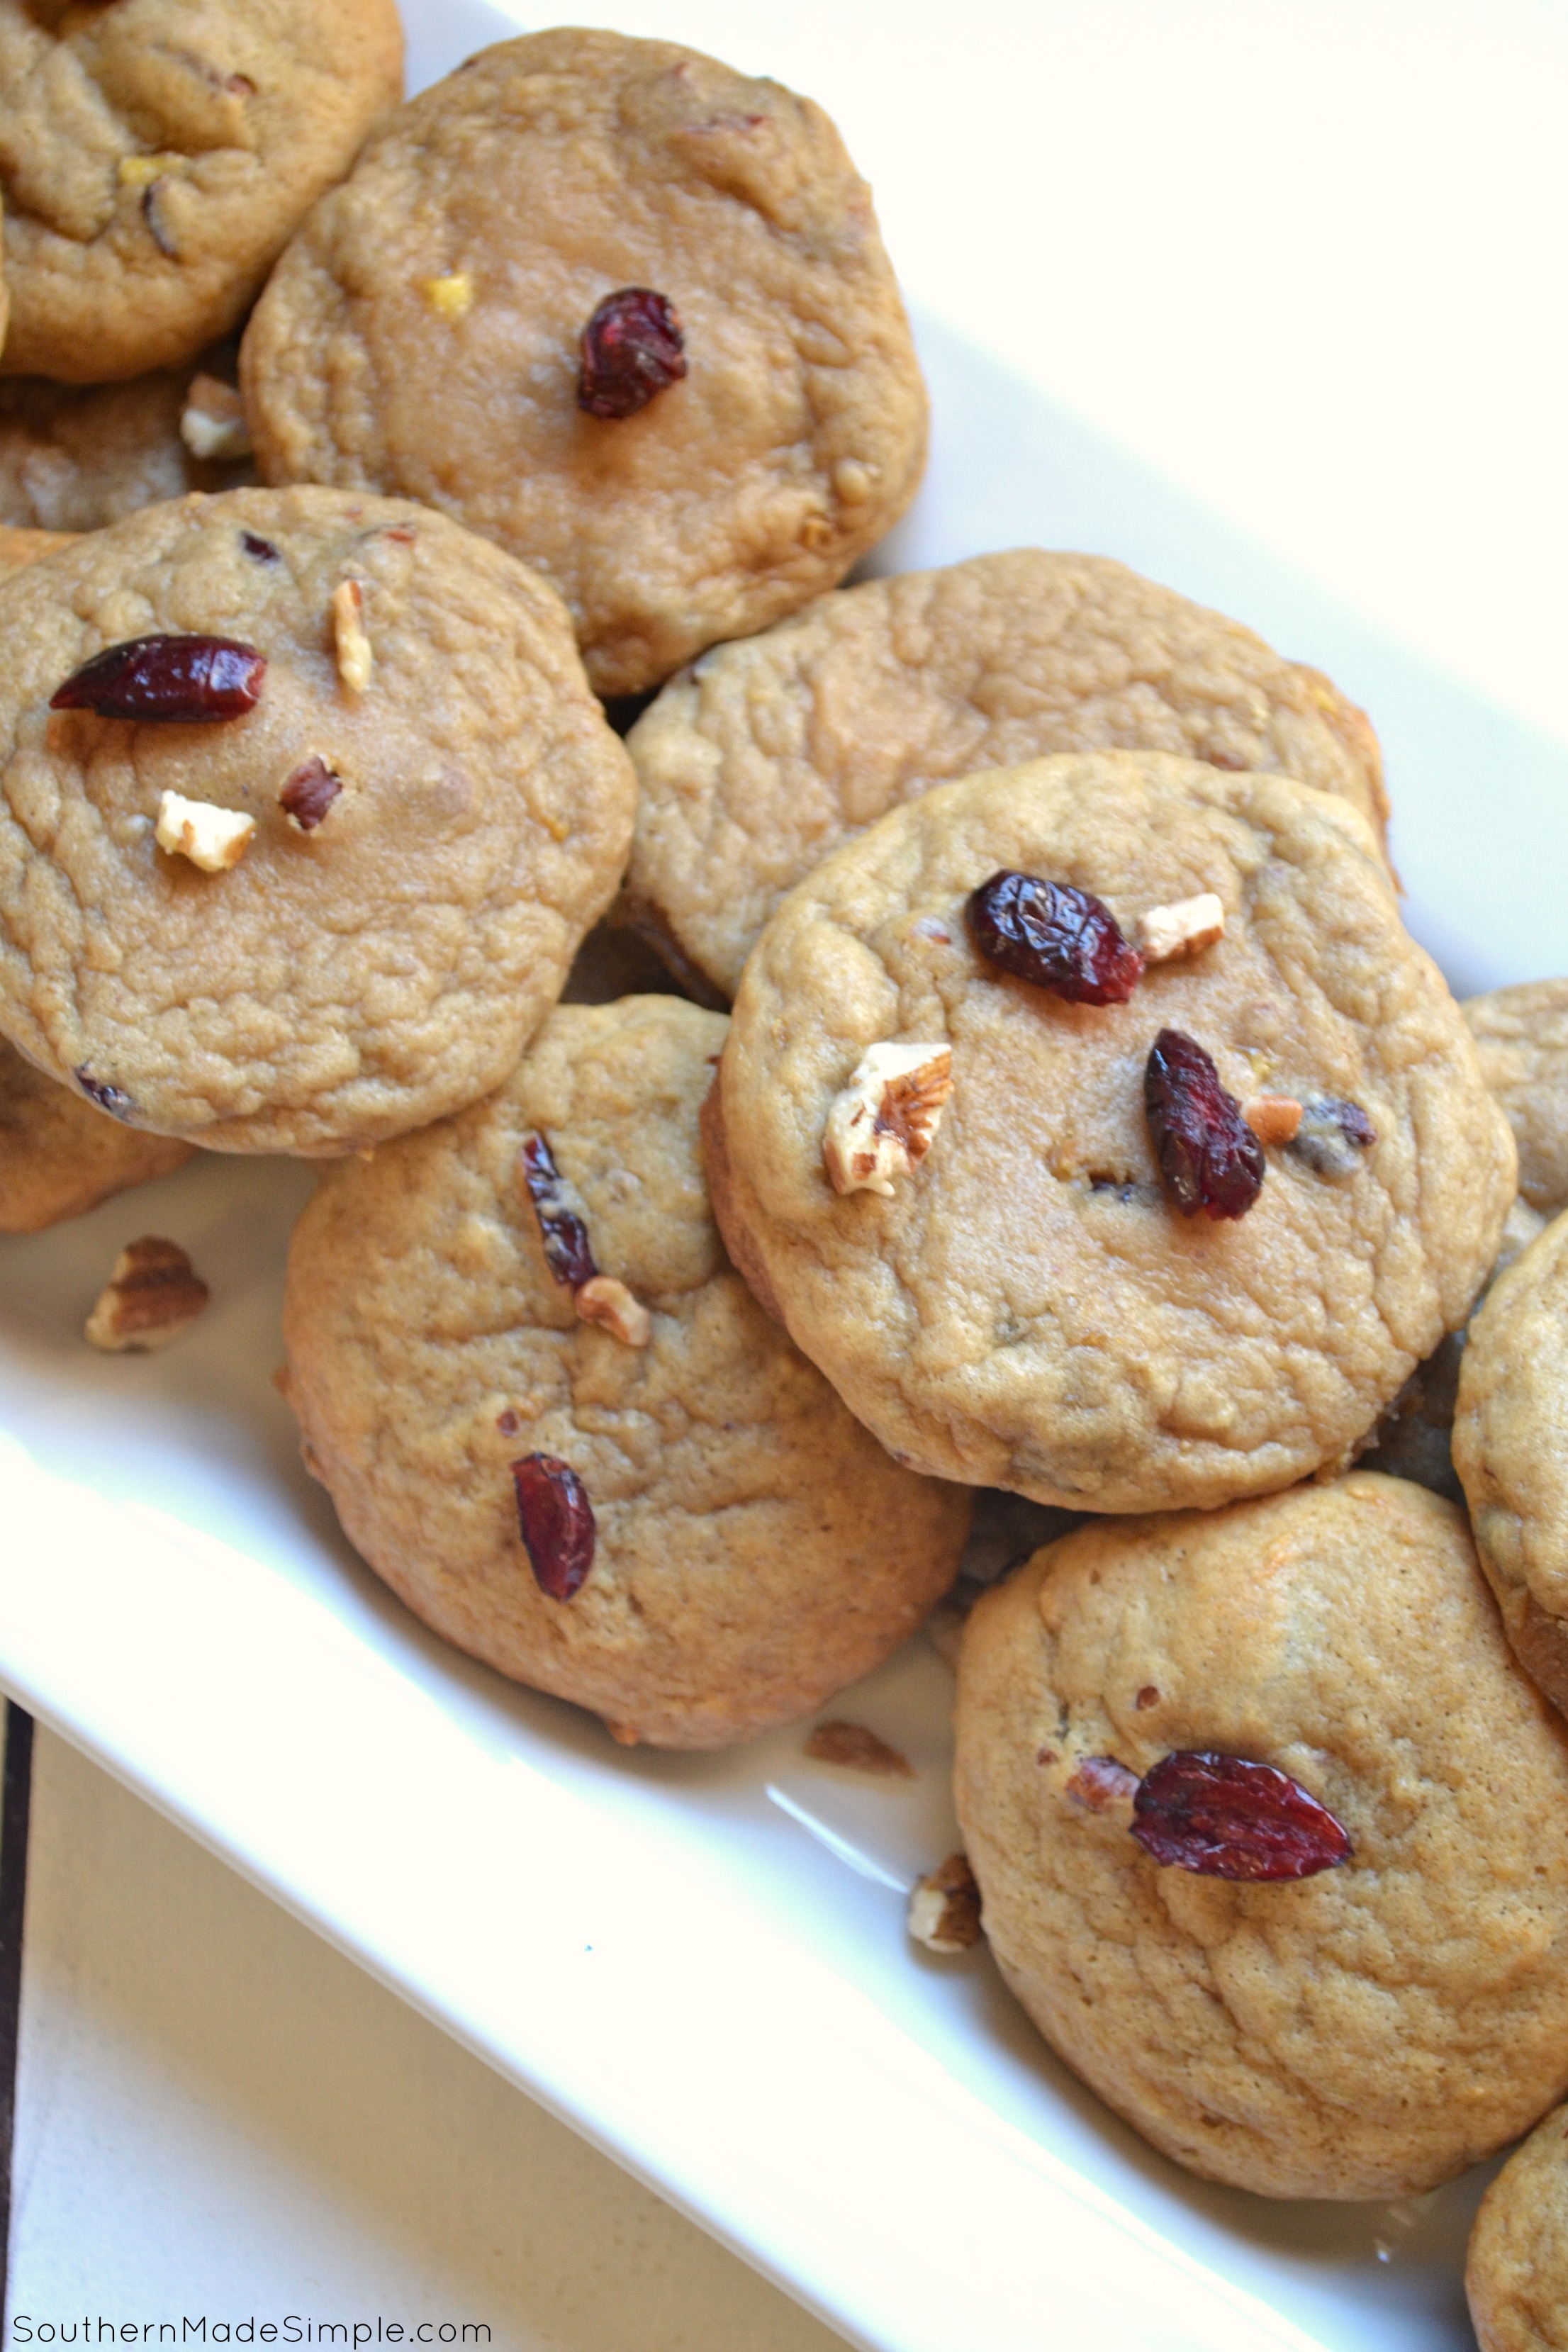 These Banana Nut Cranberry Cookies taste just like a delicious banana nut muffin, but in cookie form! They're perfectly moist, soft and chewy!